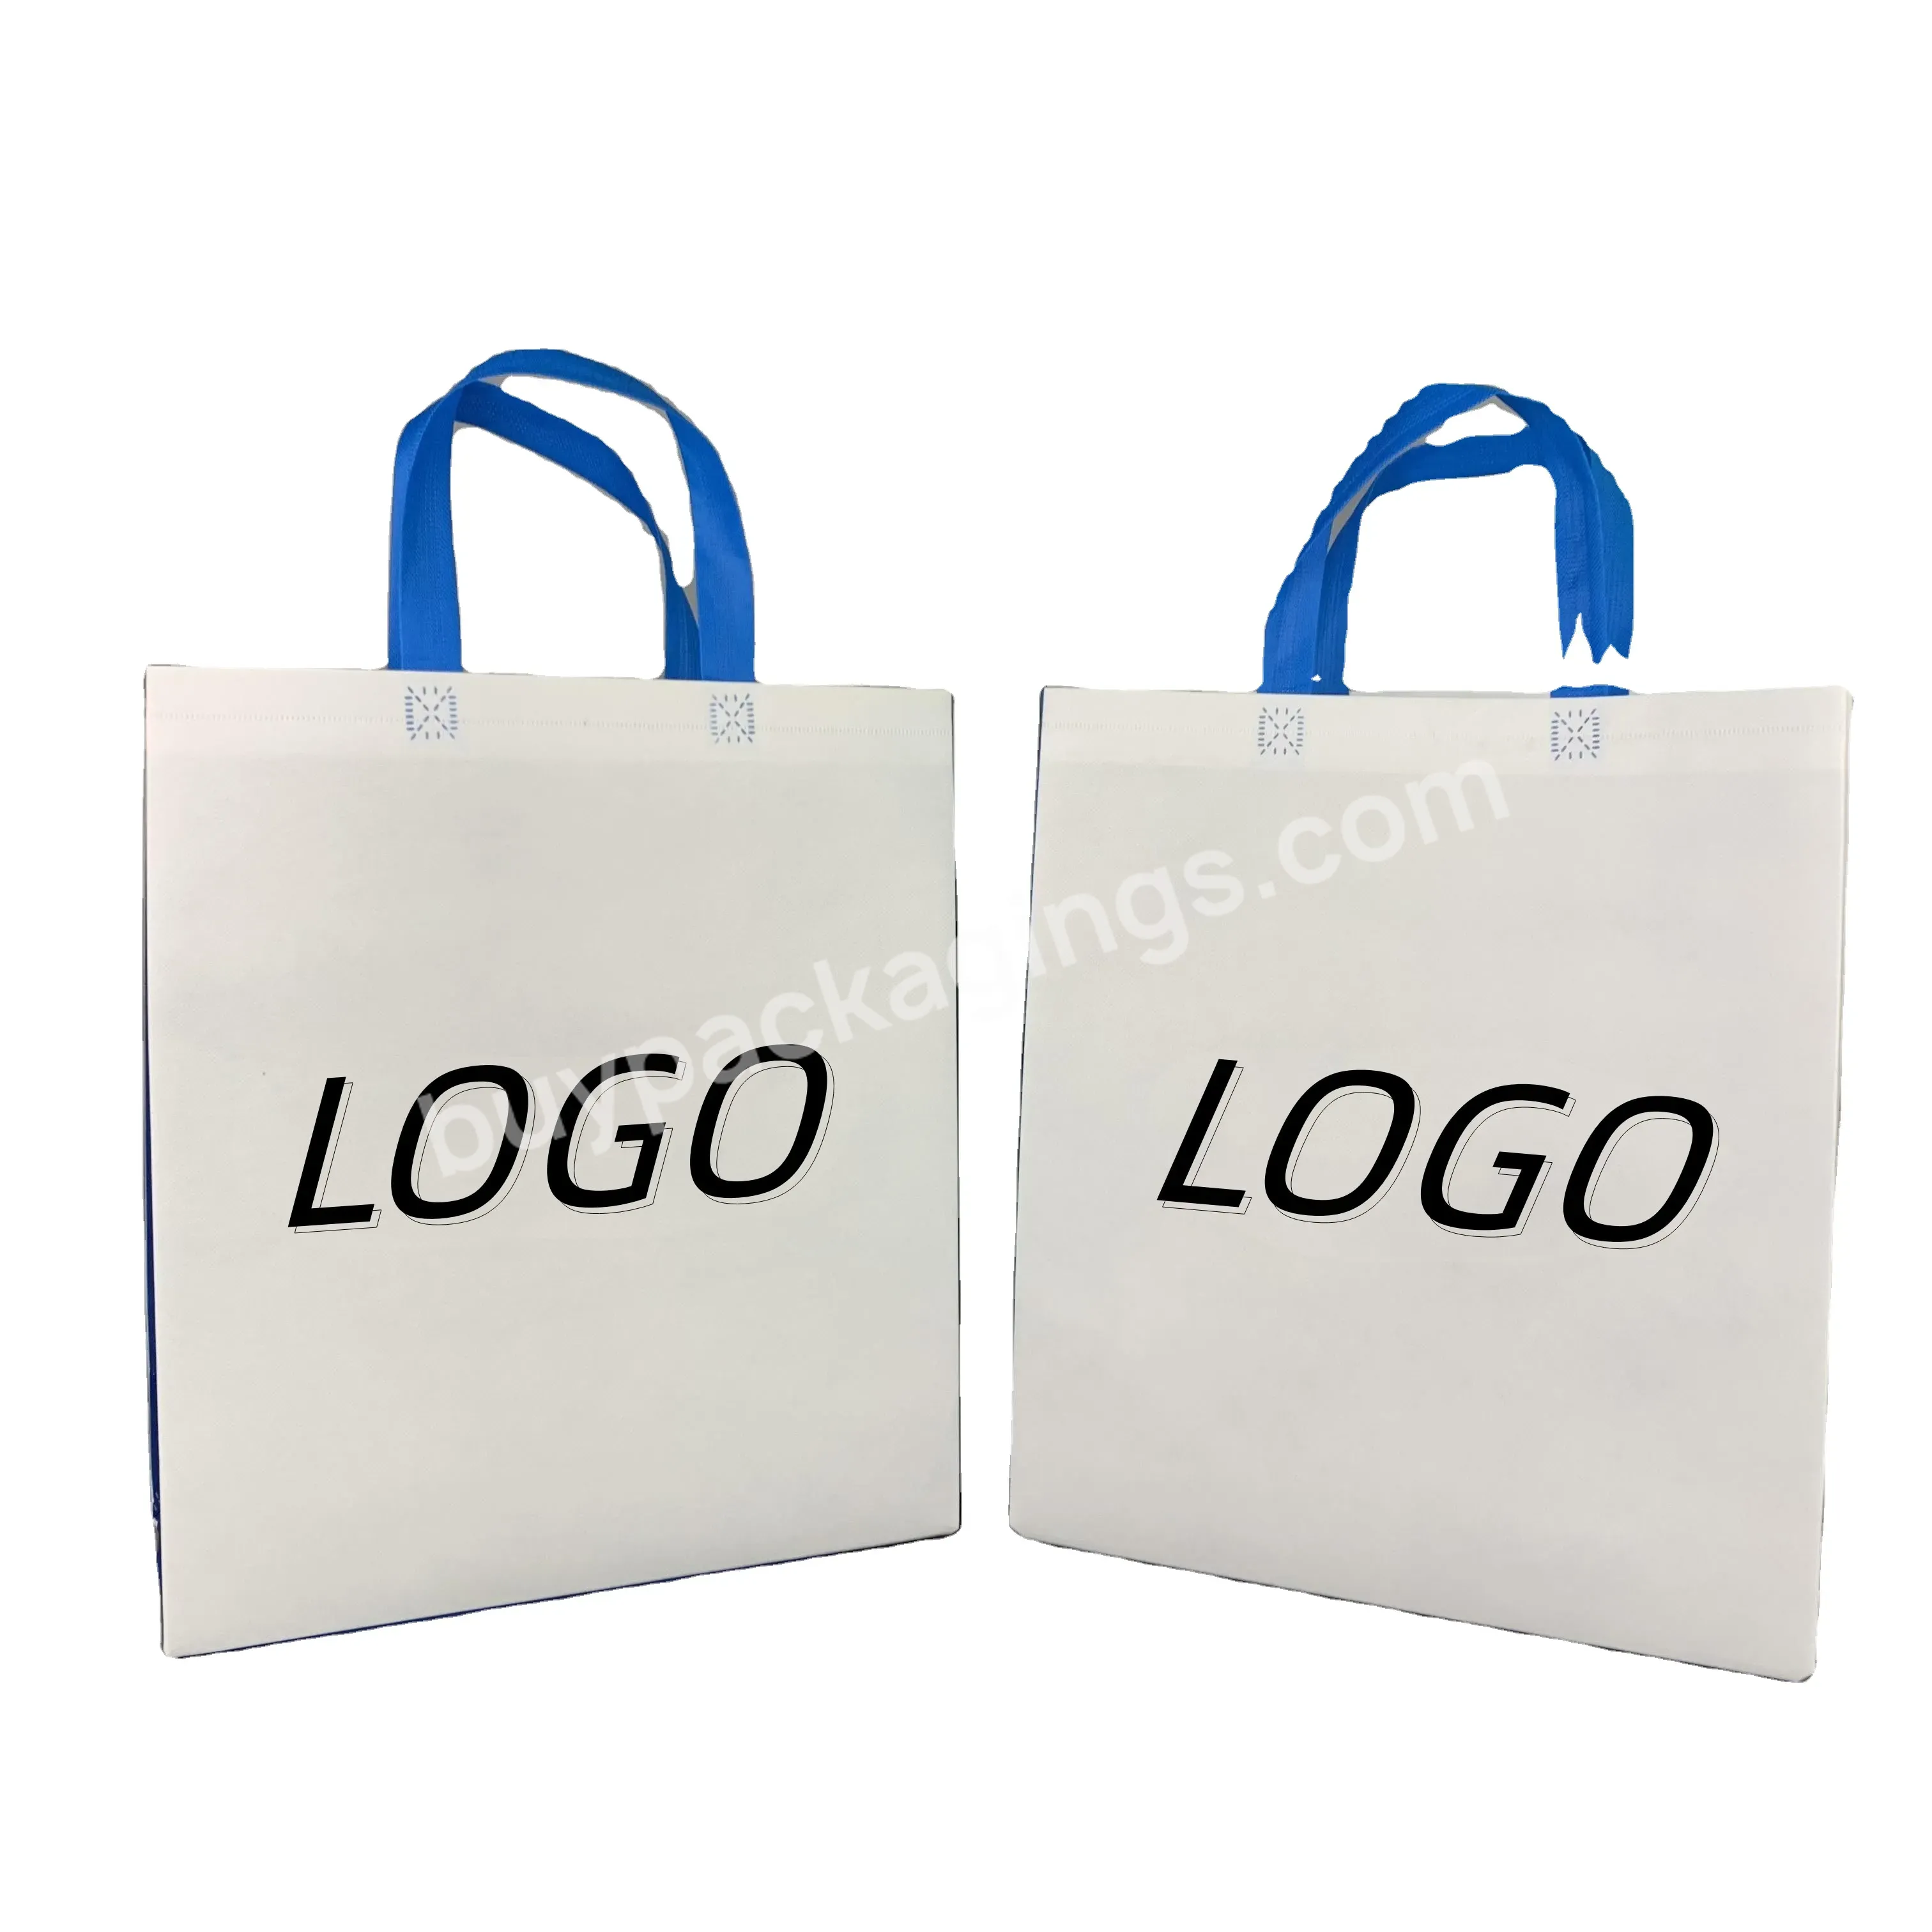 Hot Sale Colorful And Top Quality Laminated Ecological Eco-friendly Handle Nonwoven Bag For Gift Bag - Buy Hot Sale Colorful Ecological Eco-friendly Laminated Handle Nonwoven Bag For Gift,Handle Nonwoven Bag,Customize Logo For Gift Bag.